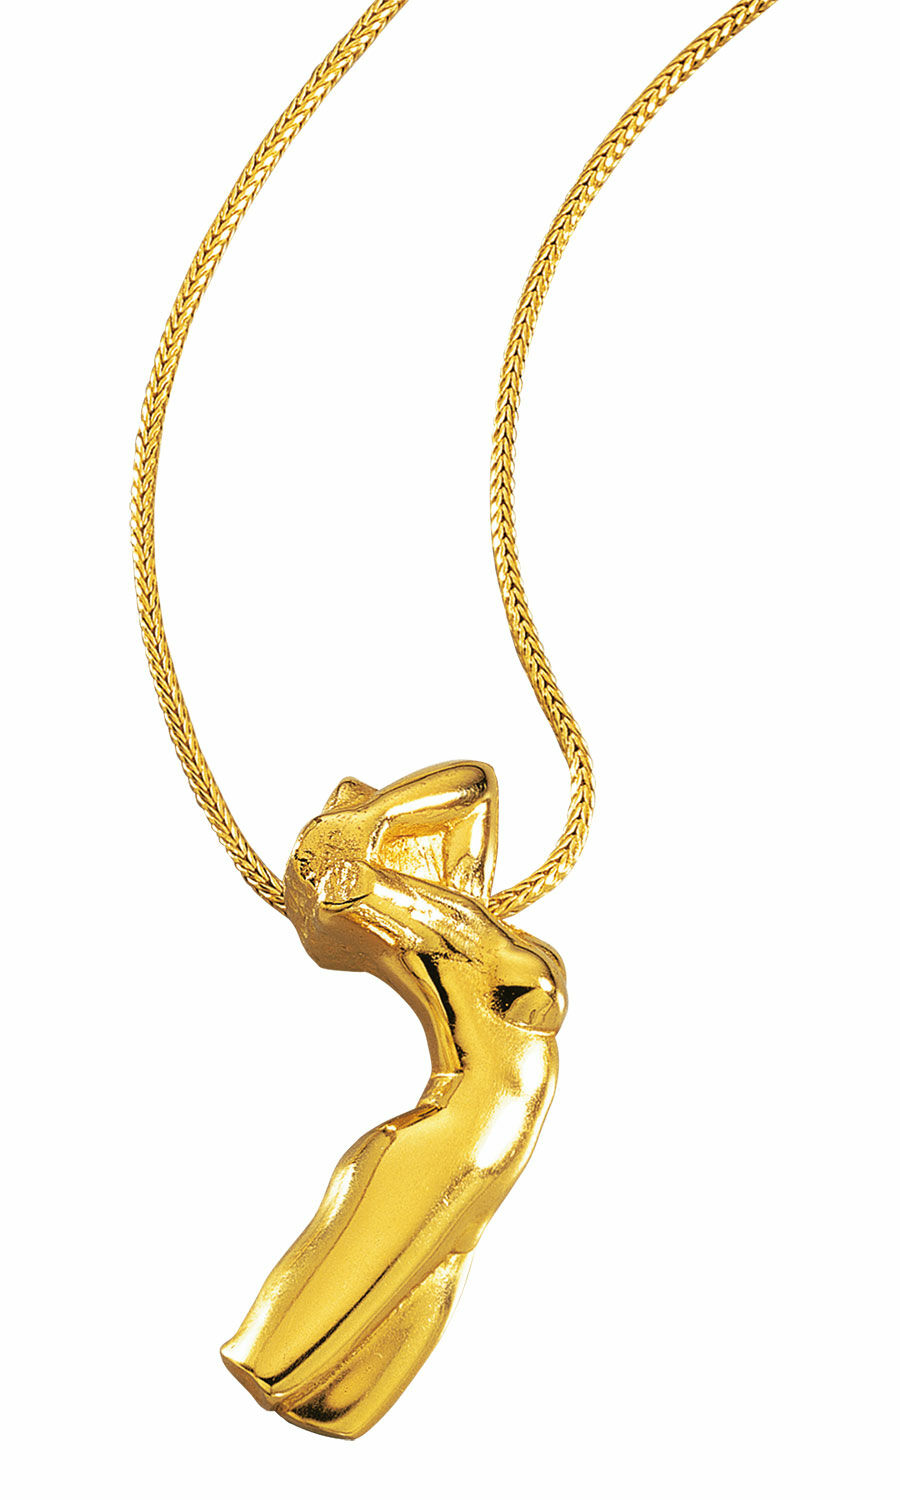 Necklace "Torso of Adele" - after Auguste Rodin by Christiane Wendt